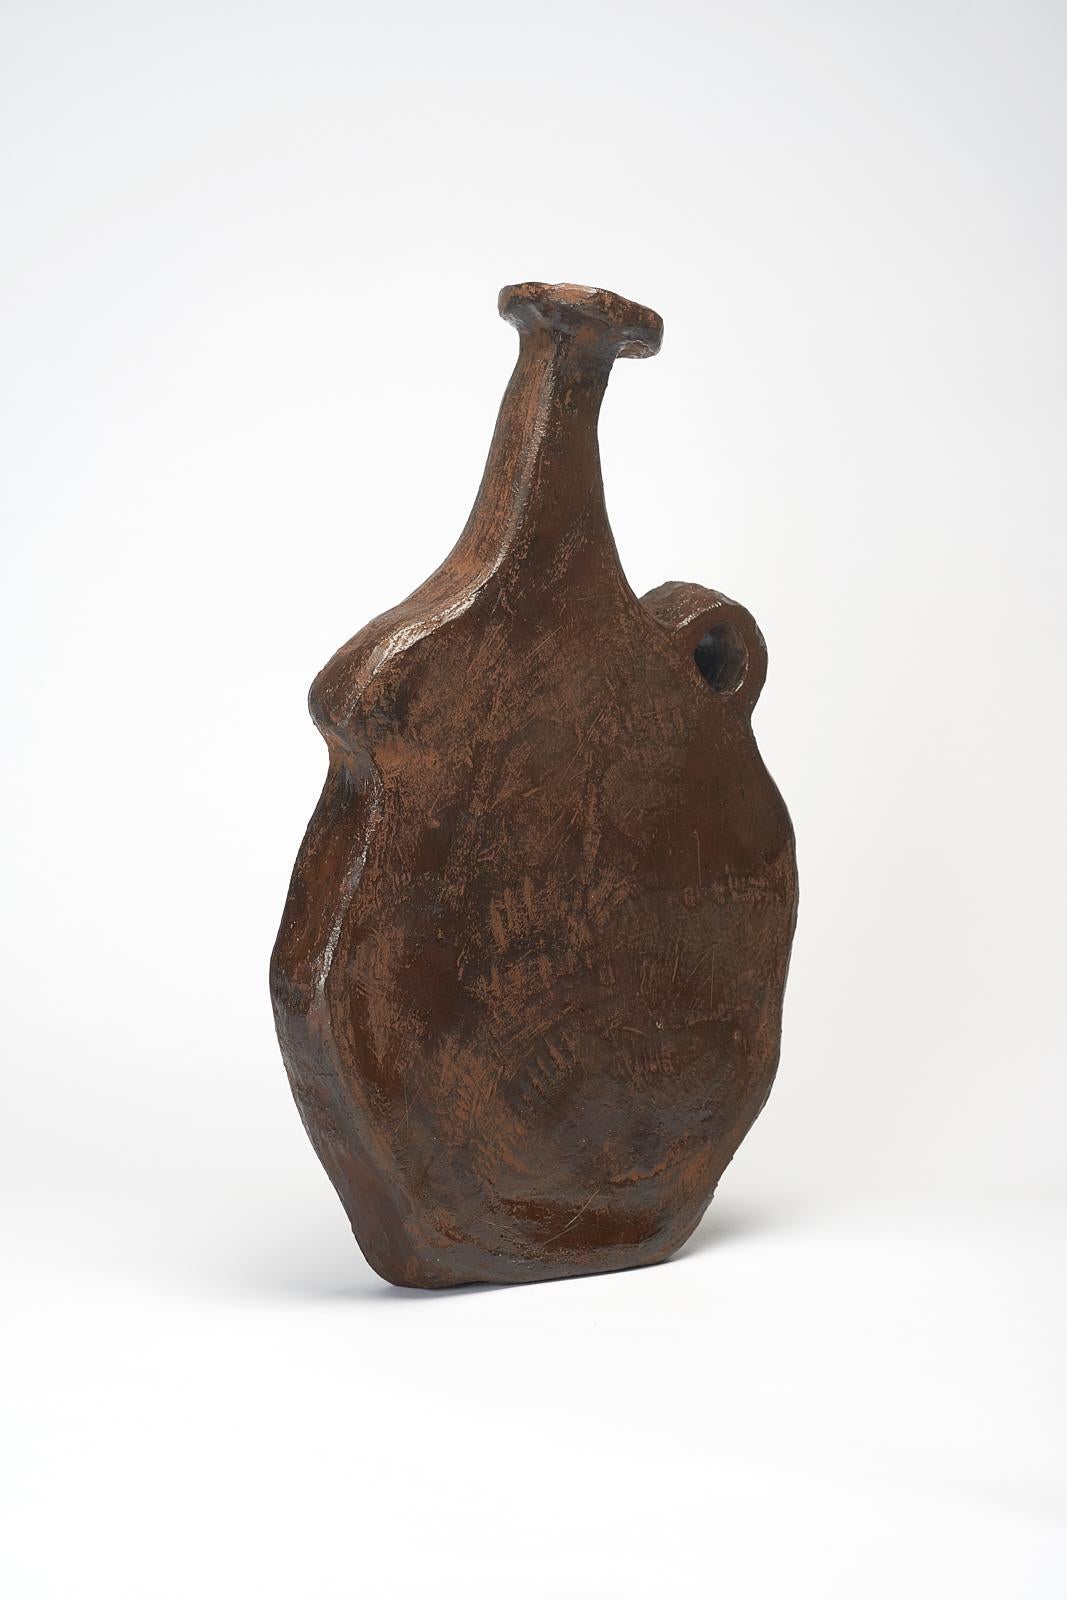 Maji Vase by Willem Van Hooff
Core Vessel Series
Dimensions: W 31 x D 10 x H 49 cm (Dimensions may vary as pieces are hand-made and might present slight variations in sizes)
Materials: Earthenware, ceramic, pigments and glaze.

Core is a series of